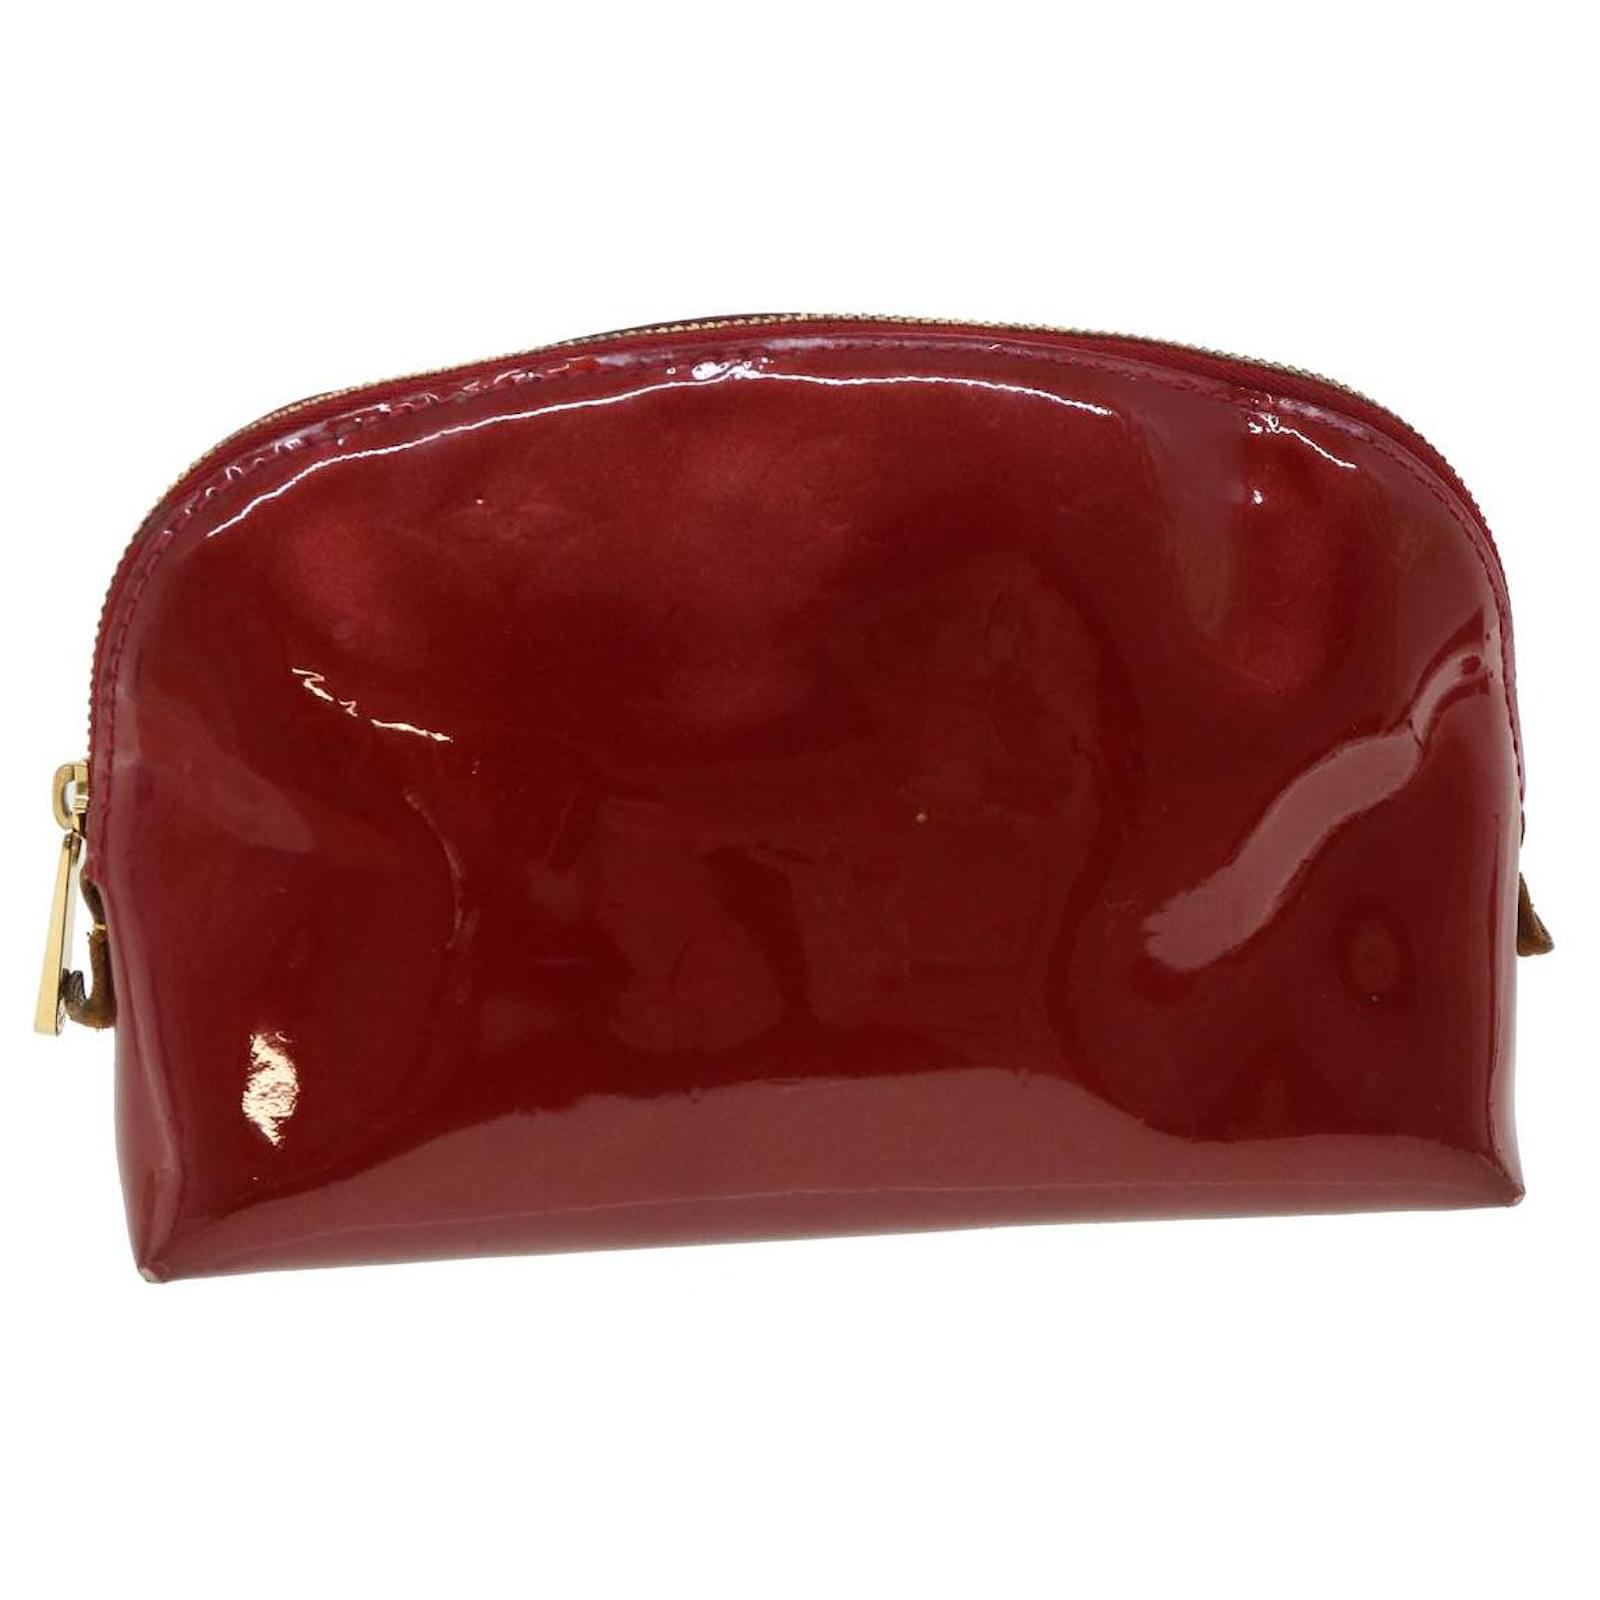 Louis Vuitton Monogram Vernis Trousse Cosmetic Pouch - Red